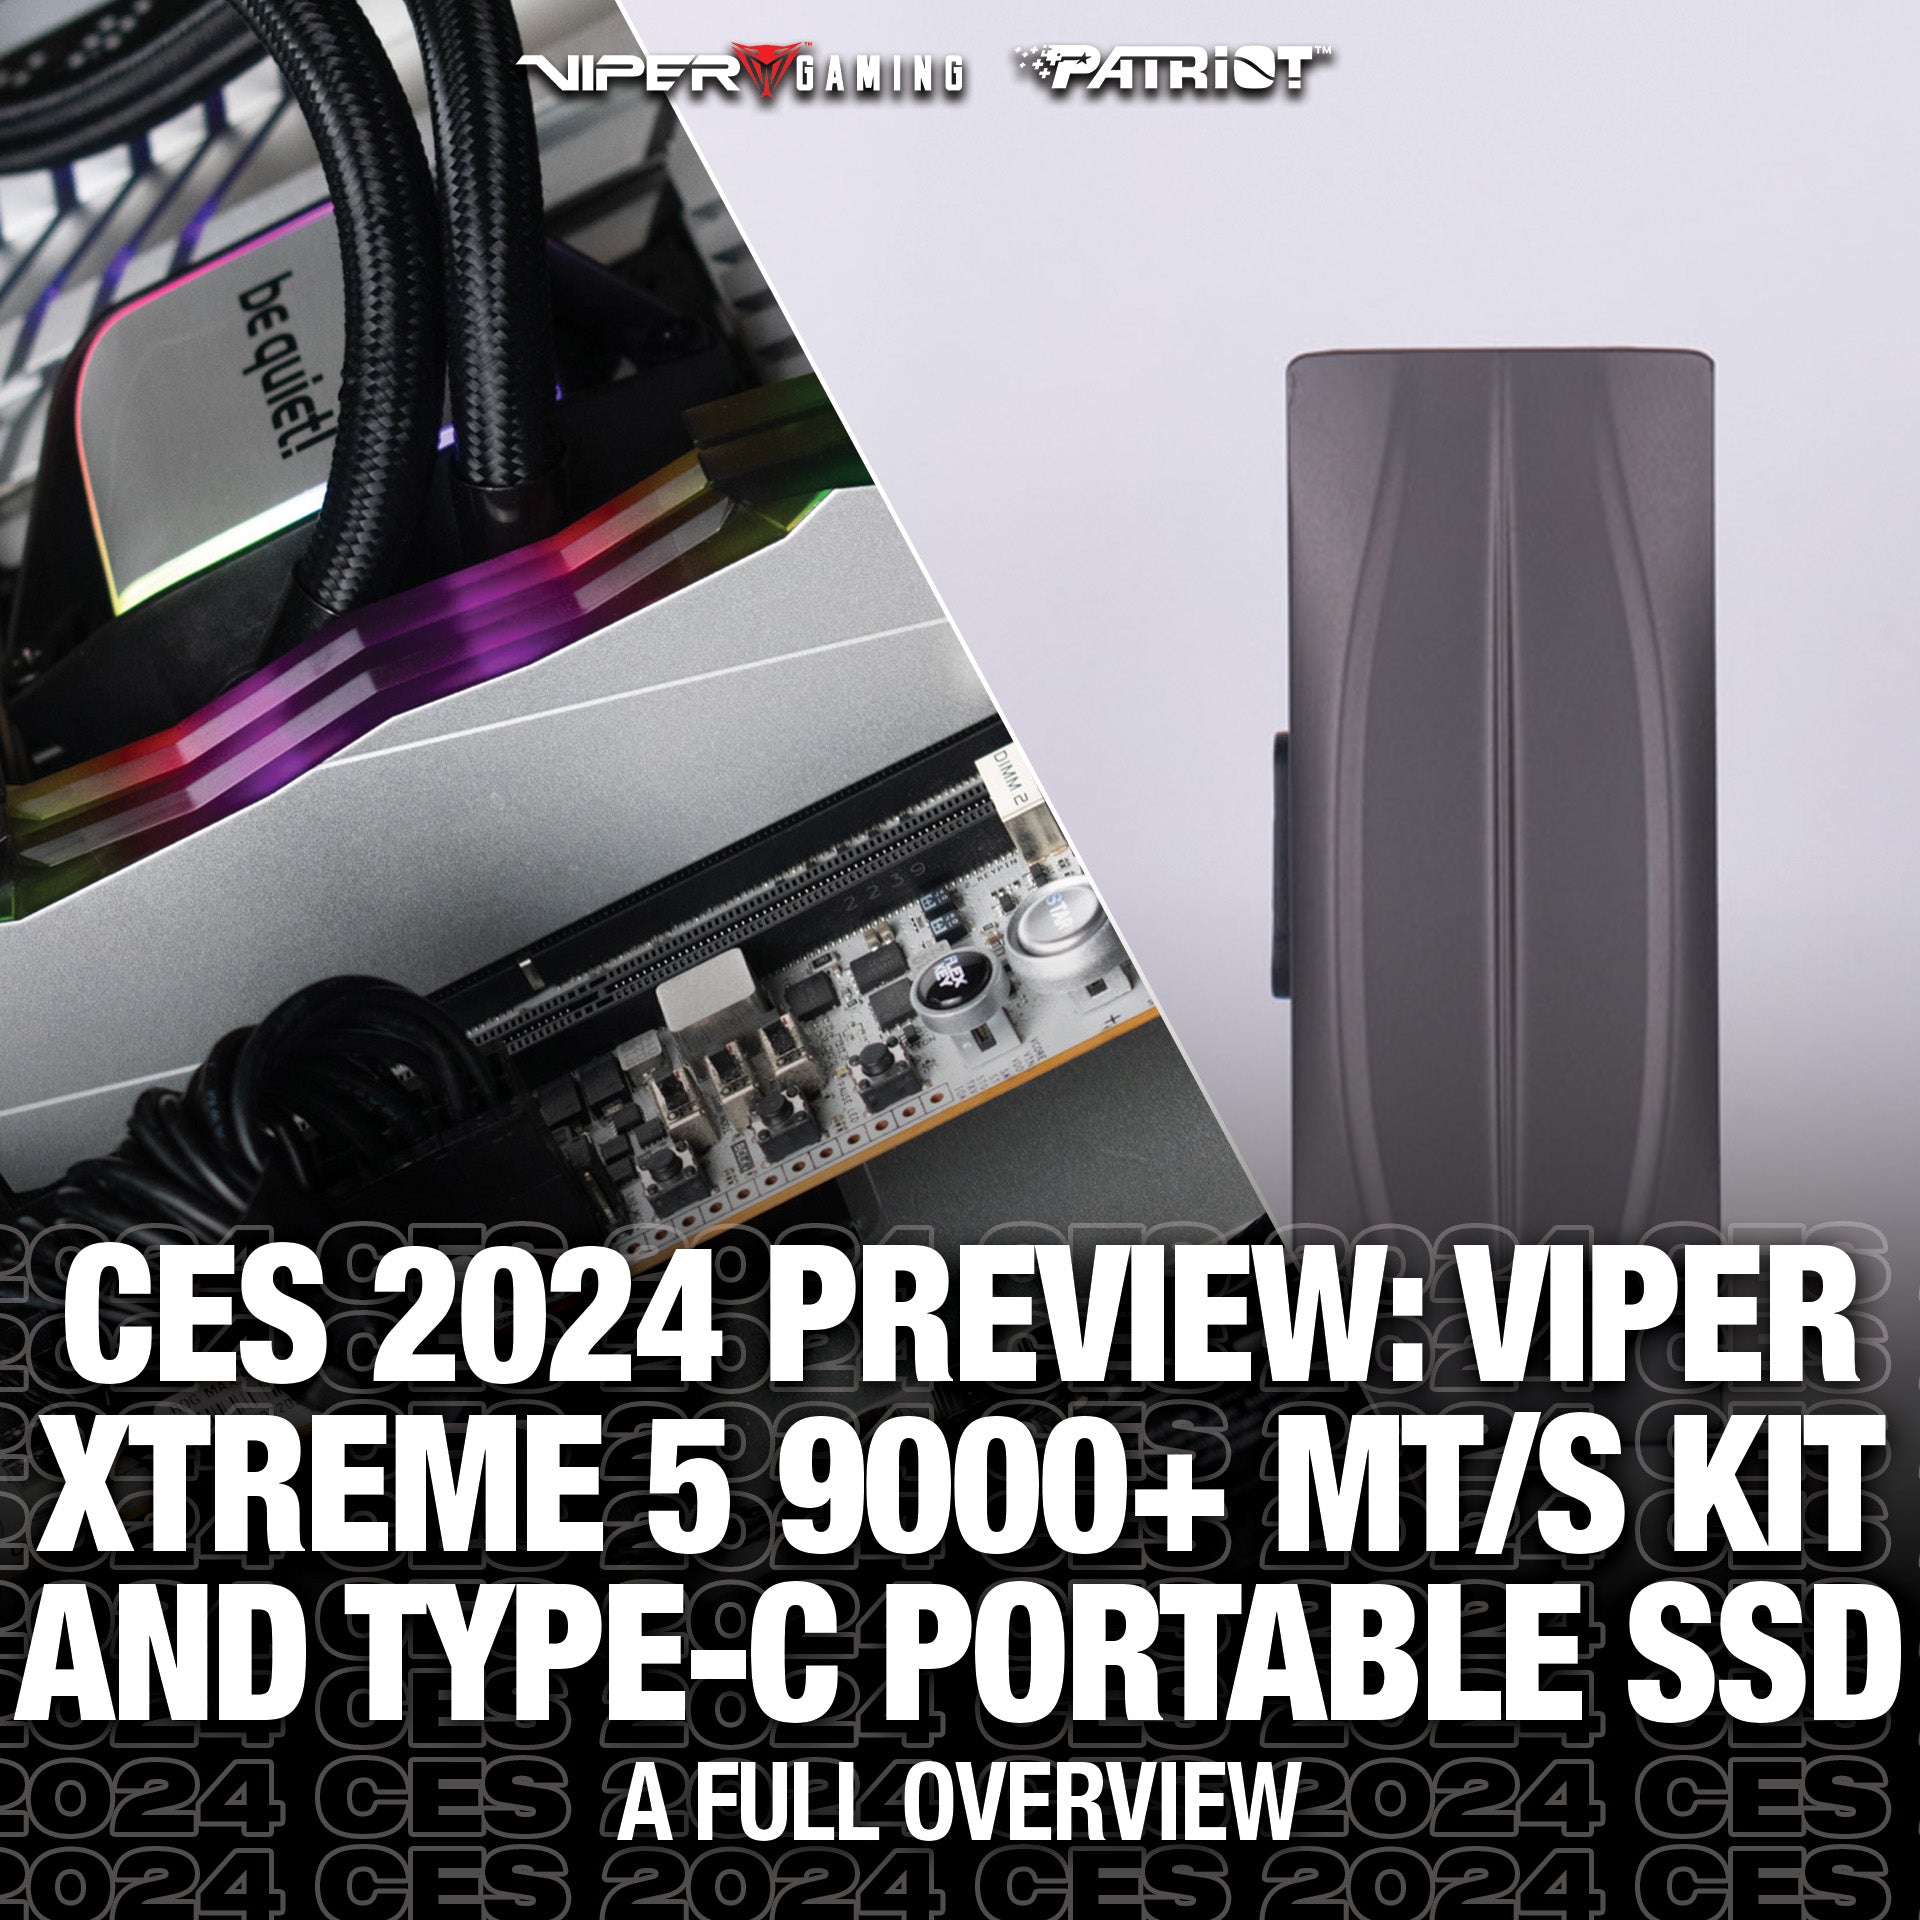 CES 2024 Preview: Viper Xtreme 5 Non-RGB DDR5 9000+ MT/s Kit and the Portable SSD Type C